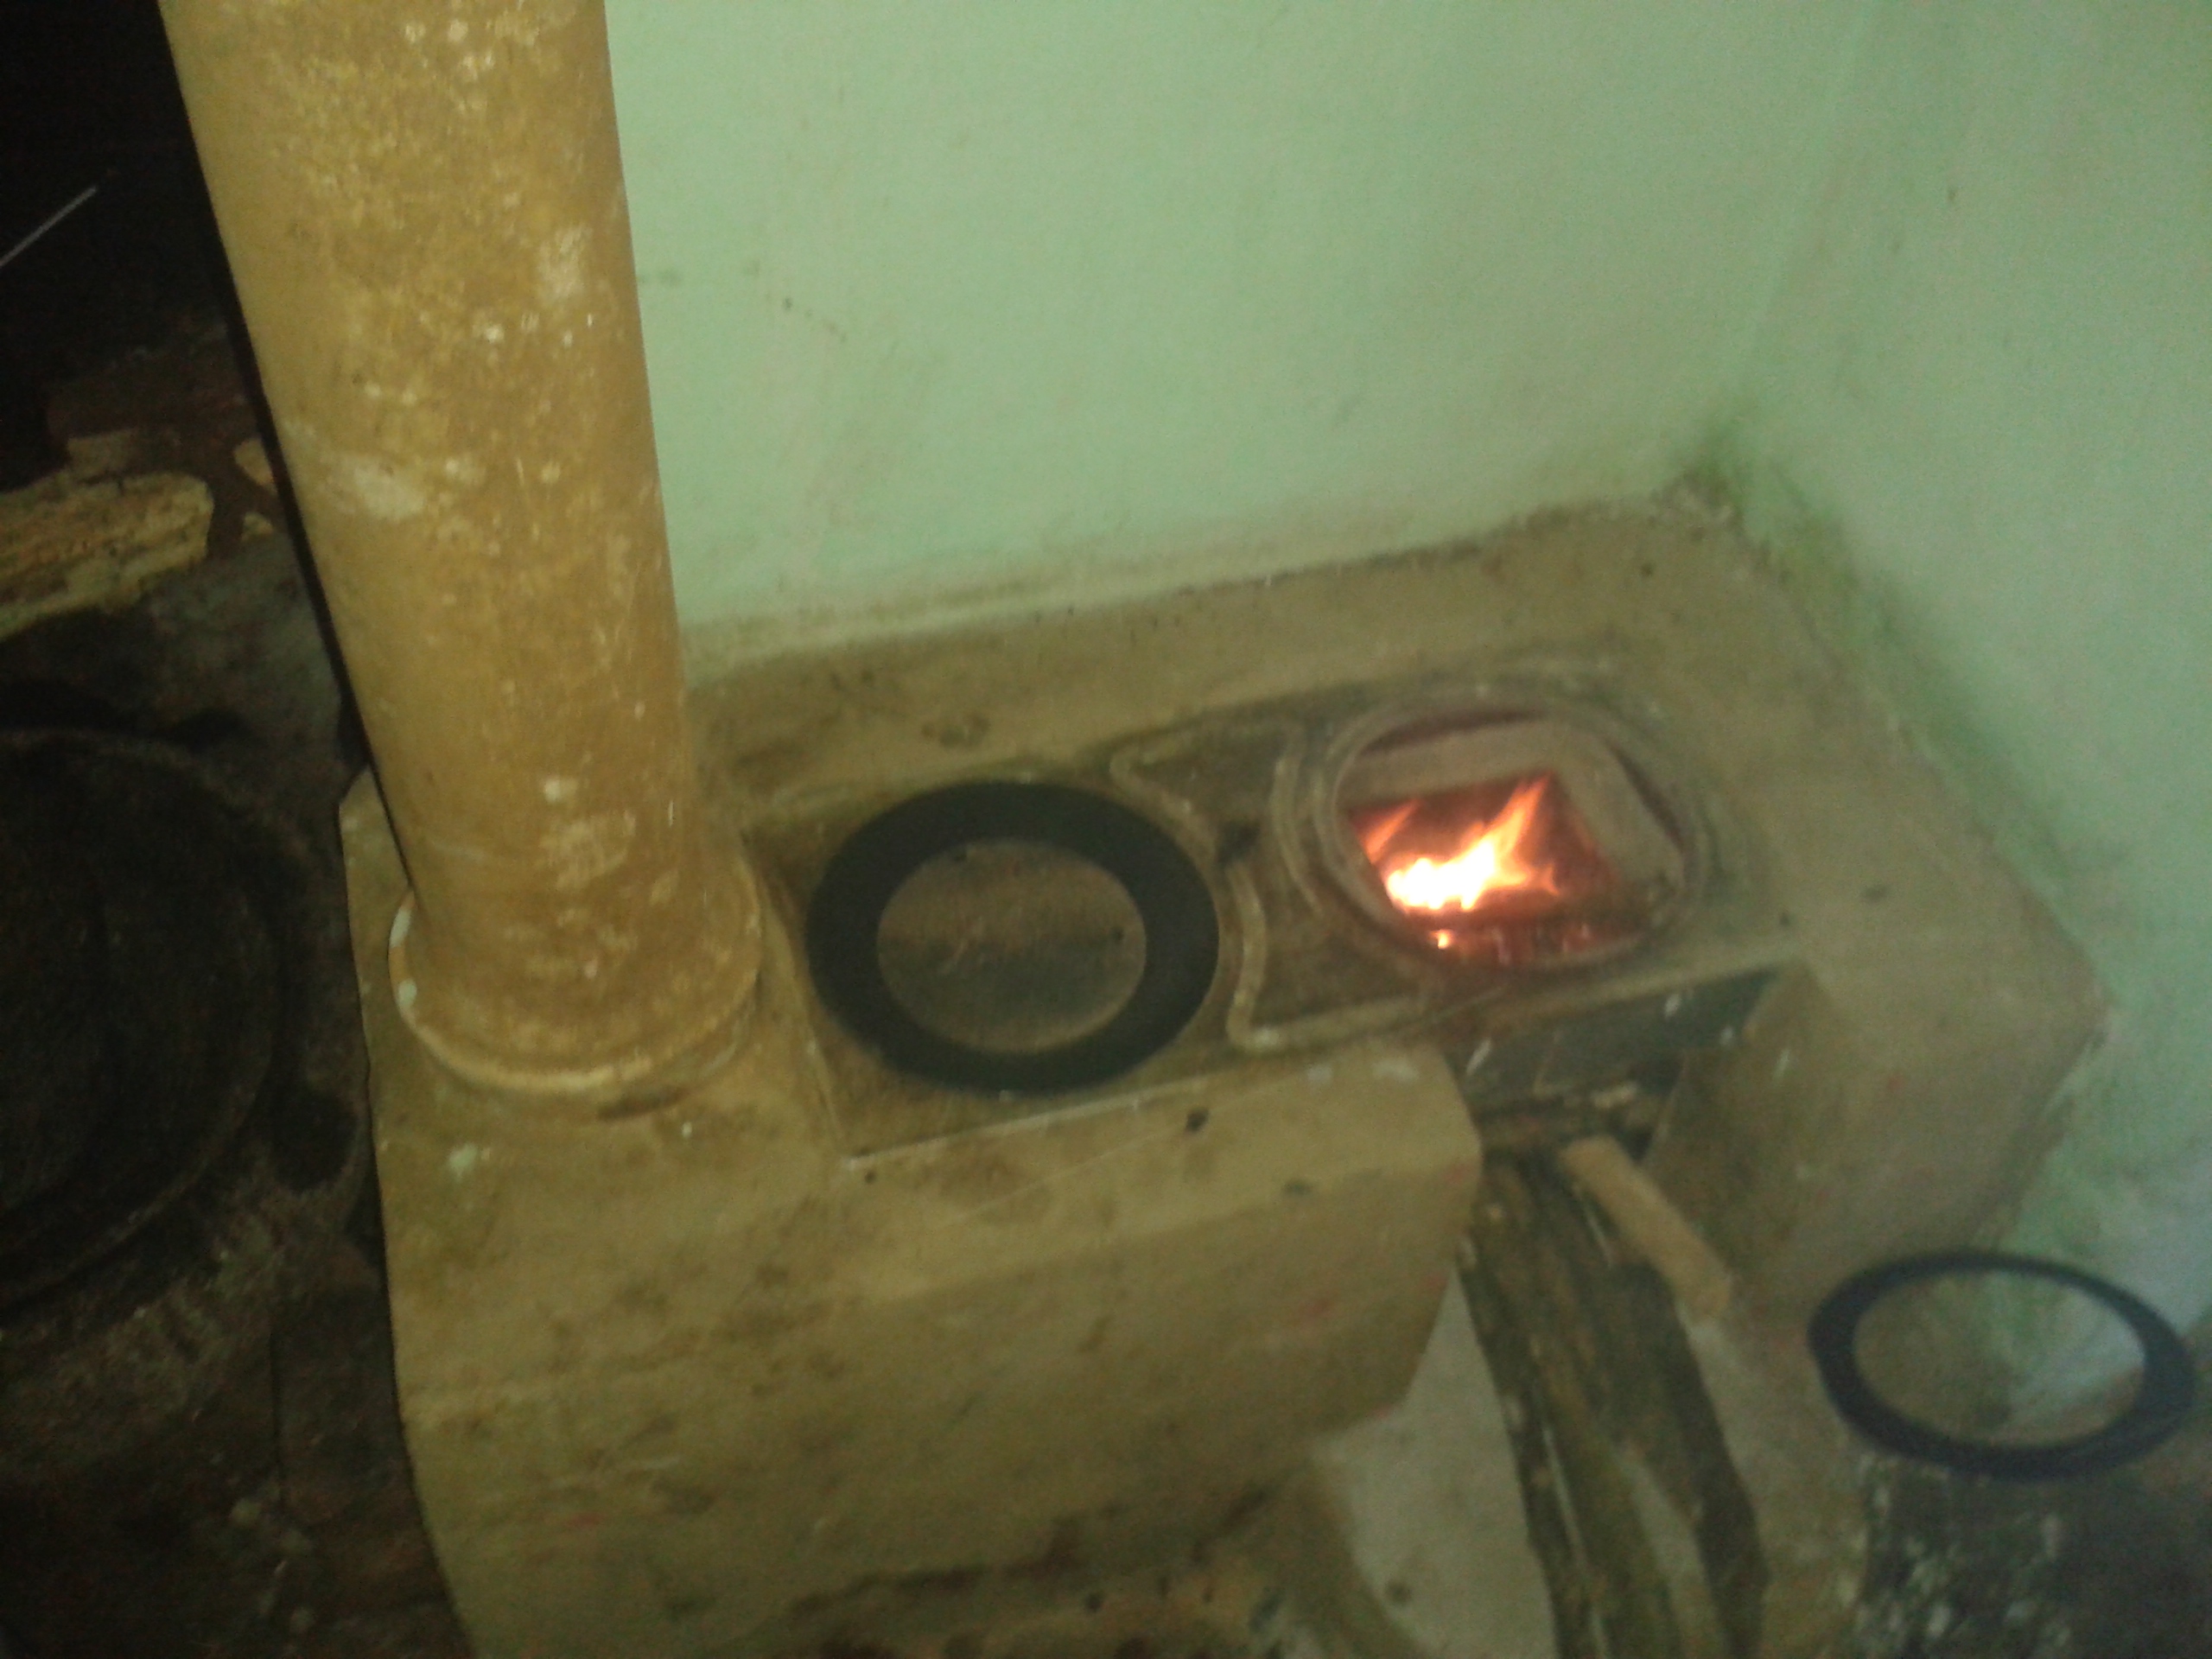 One of the most important findings in my research phase with Prakti was seeing one of our stoves built into a home. This was not the intension of this design, but rather a re-appropriation of our product to better suit the needs of the user.